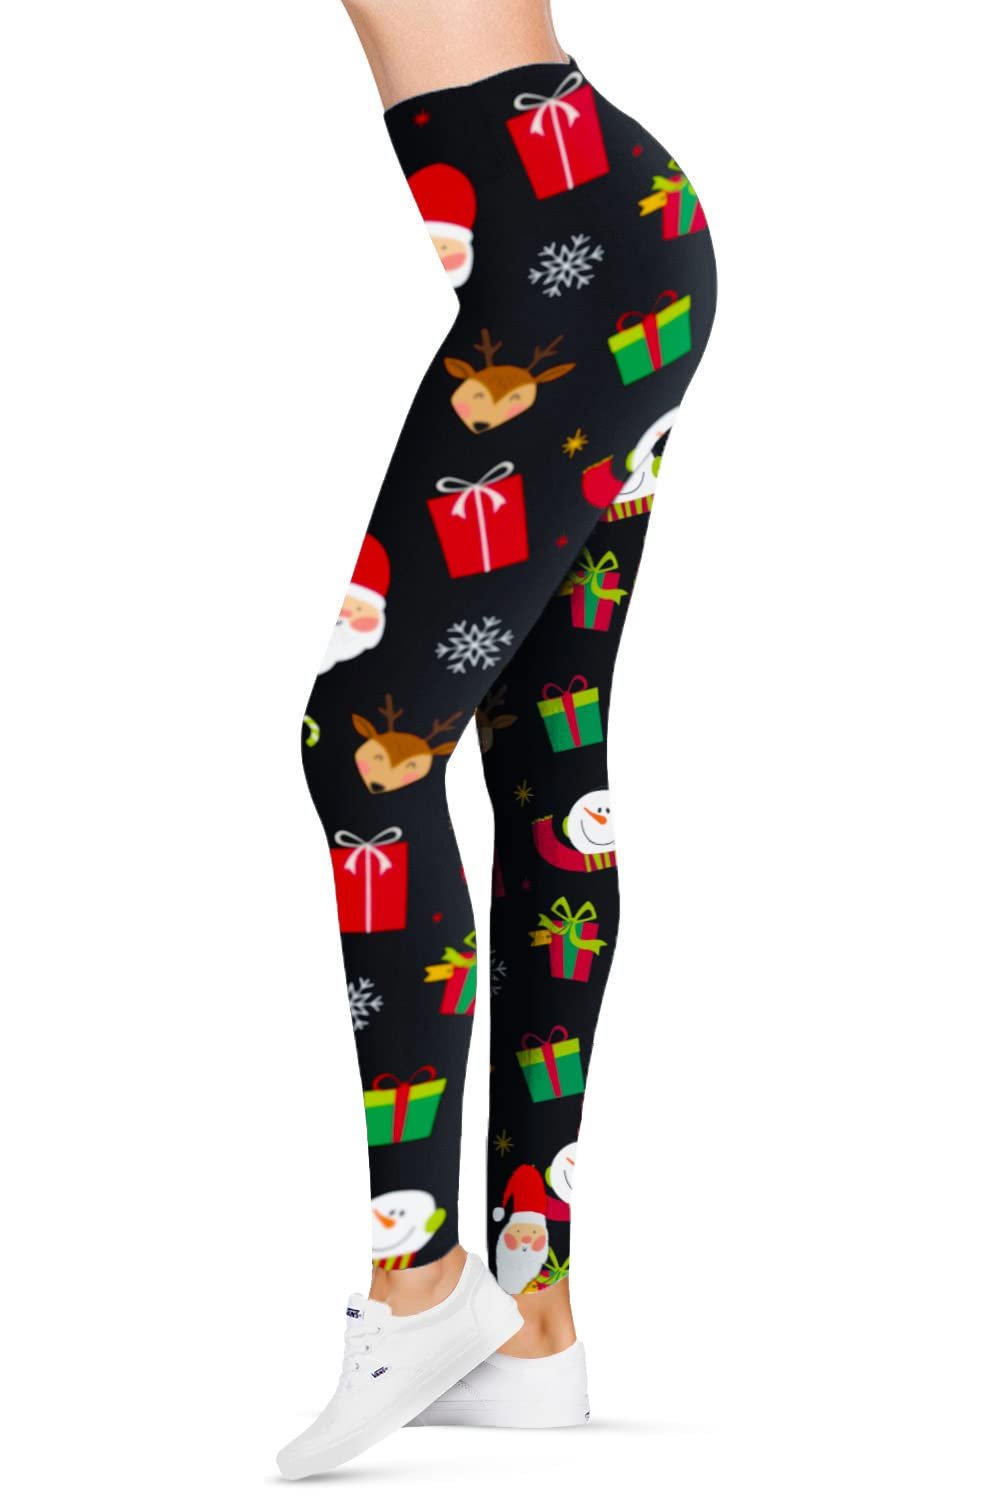 Buttery Smooth Vintage Christmas Figurine Extra Plus Size Leggings - 3X-5X